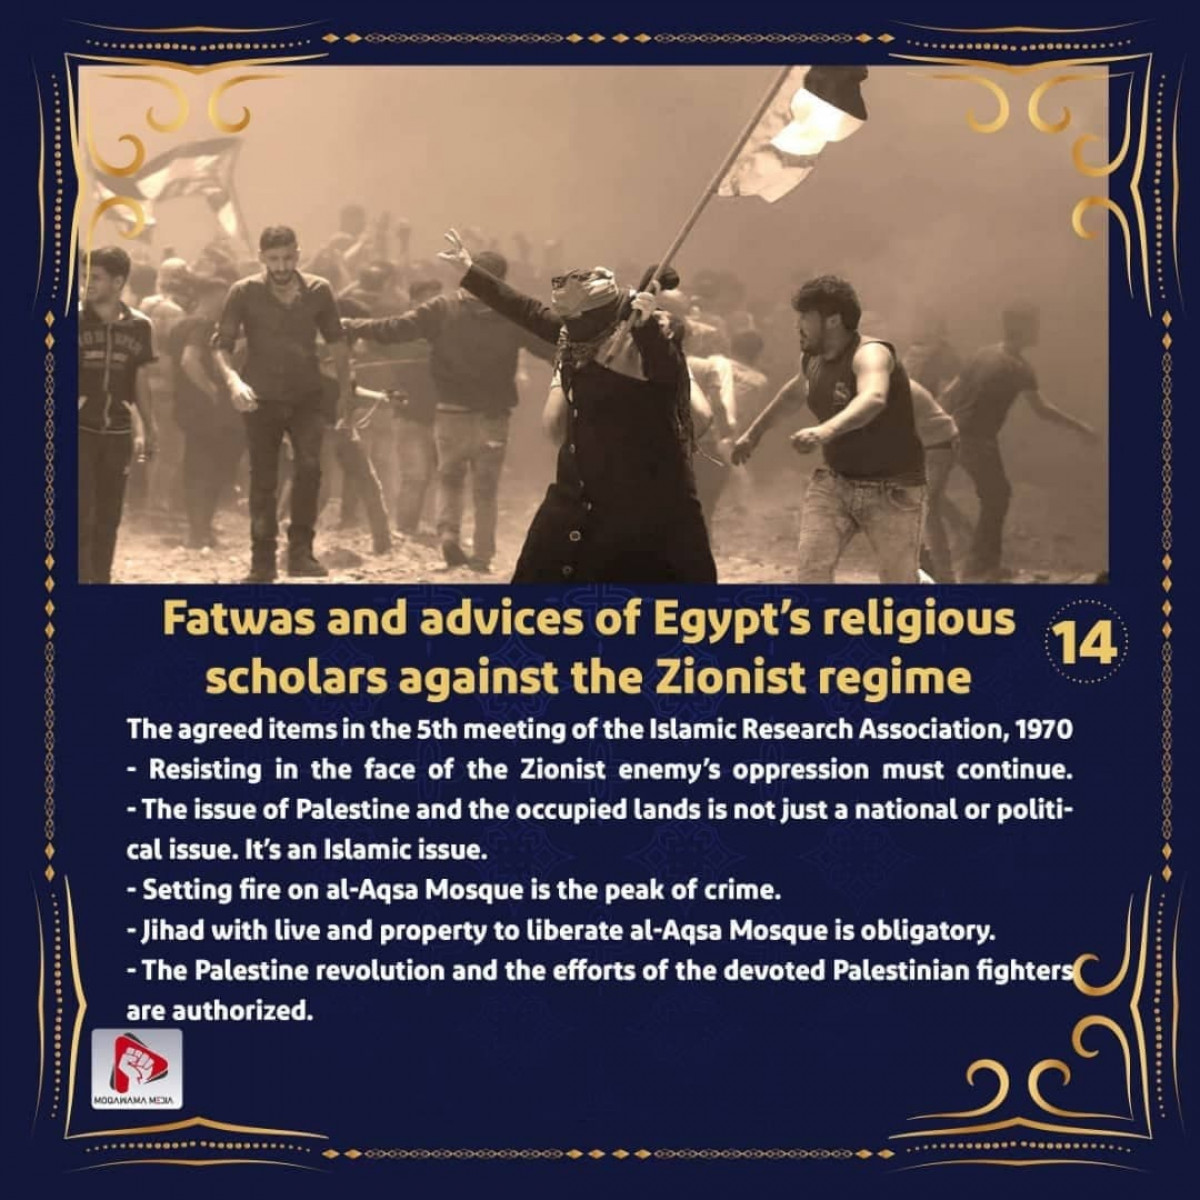 Fatwas and advices of Egypt's religious scholars against the Zionist regime 14